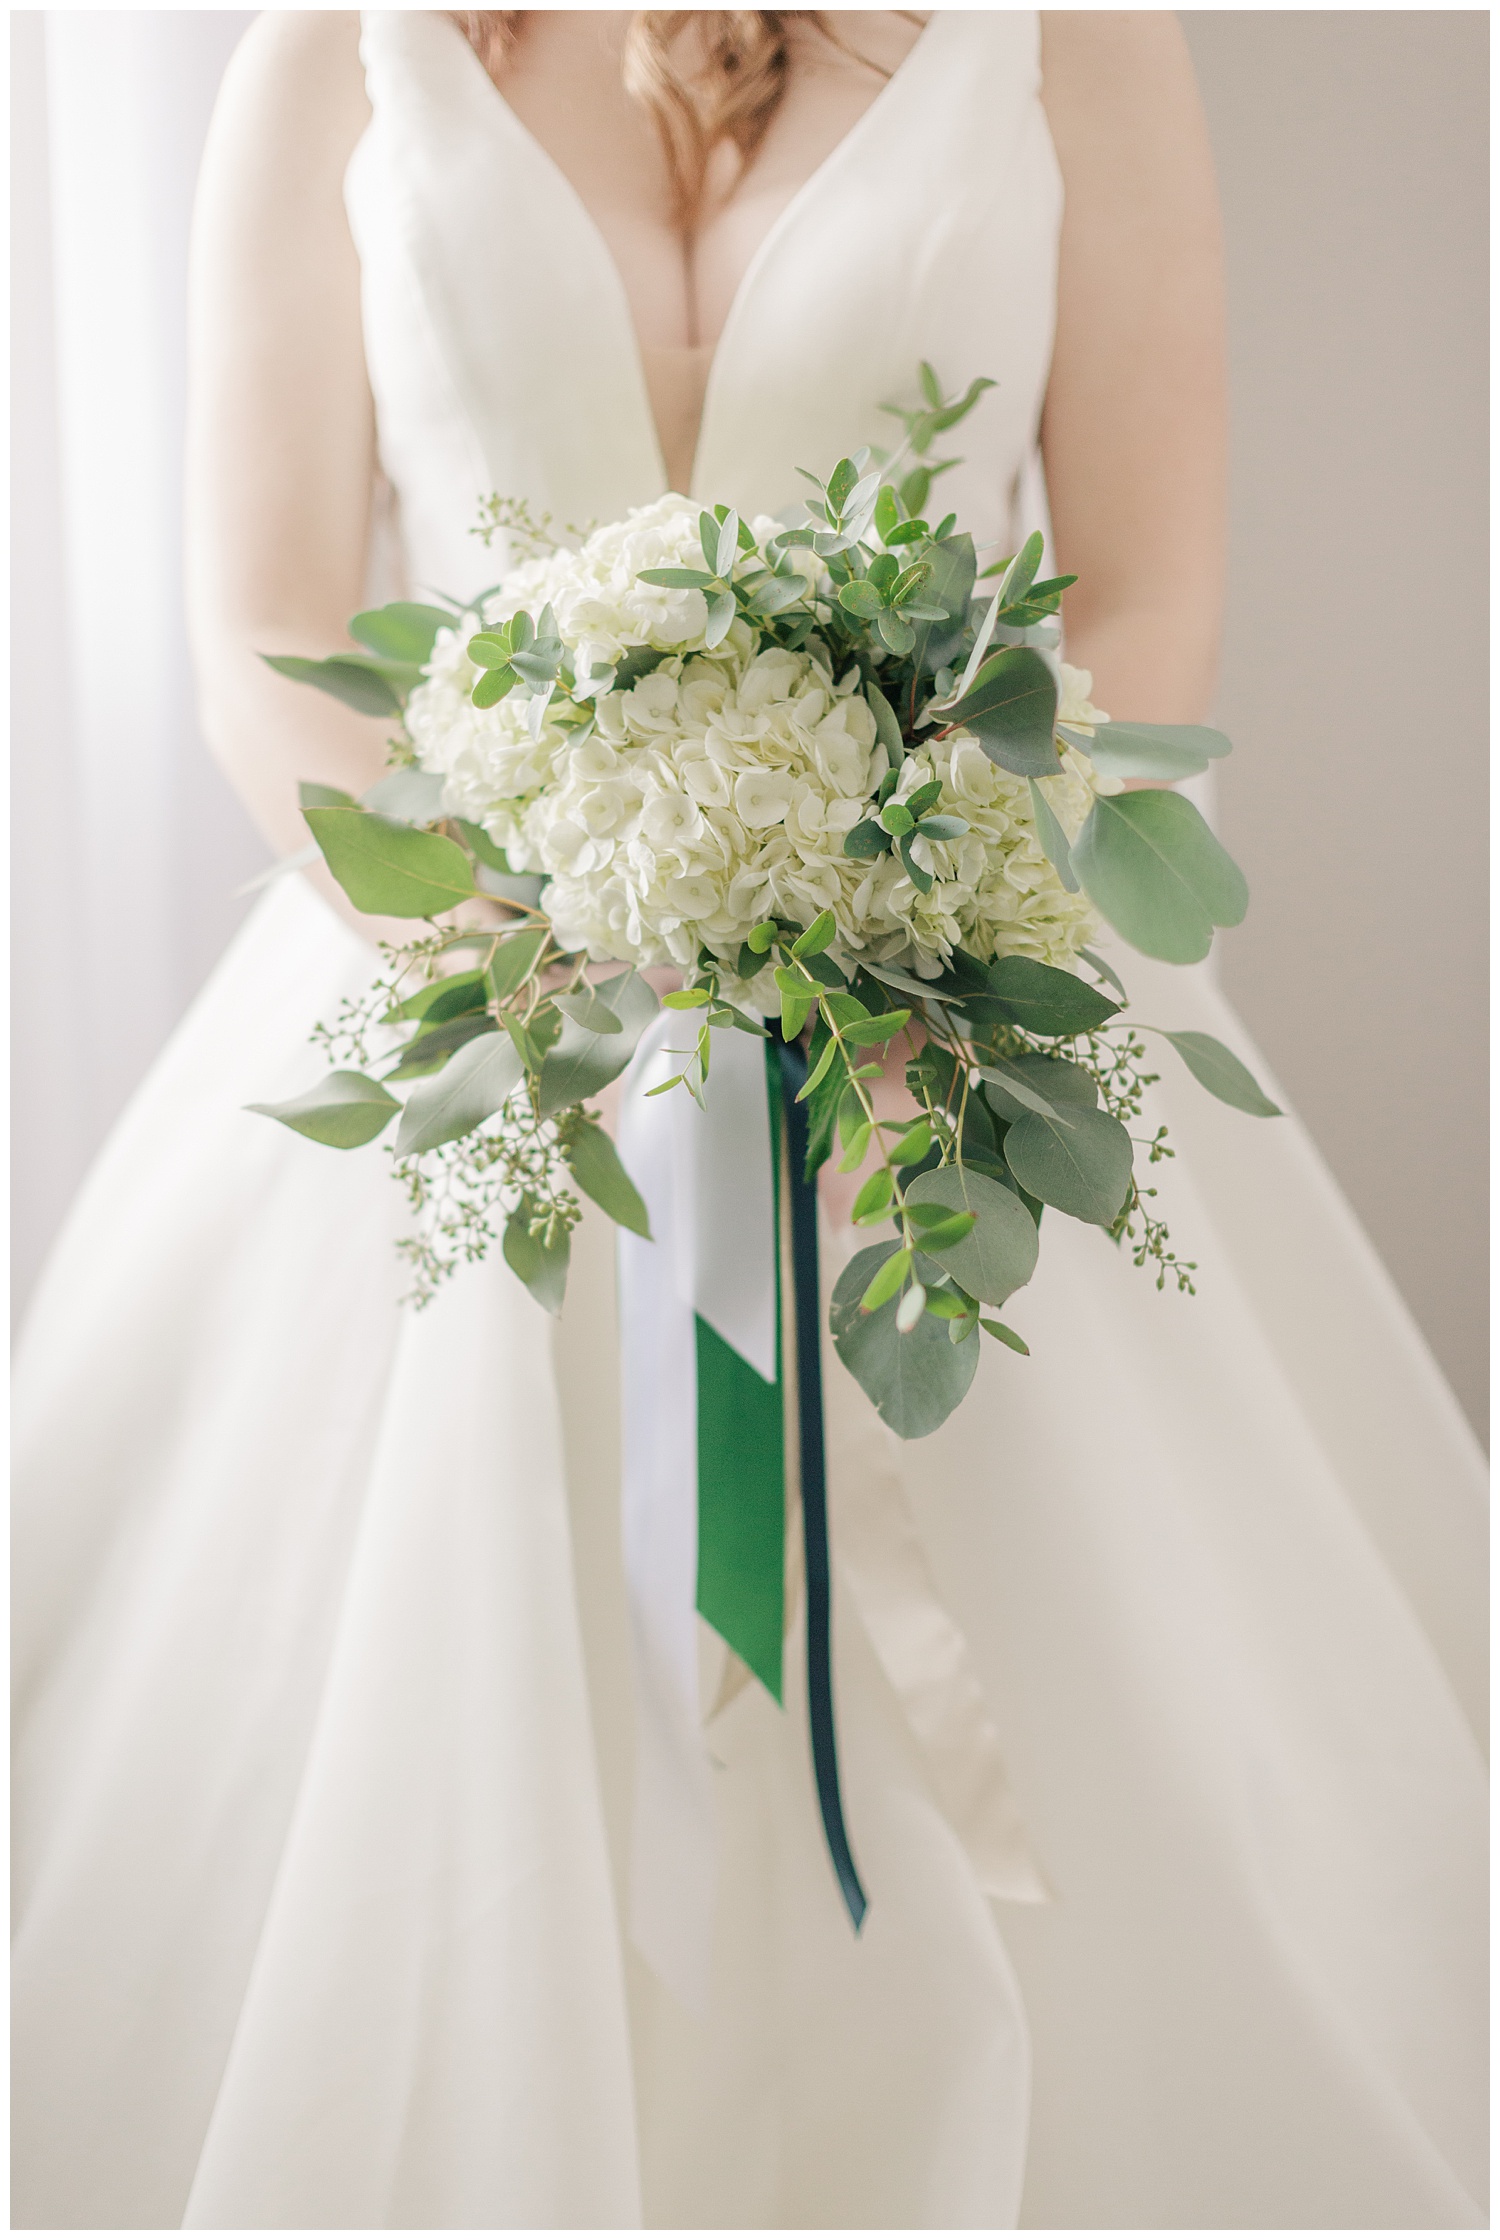 White hydrangea and eucalyptus variety bridal bouquet tied in white and emerald ribbon | CB Studio 